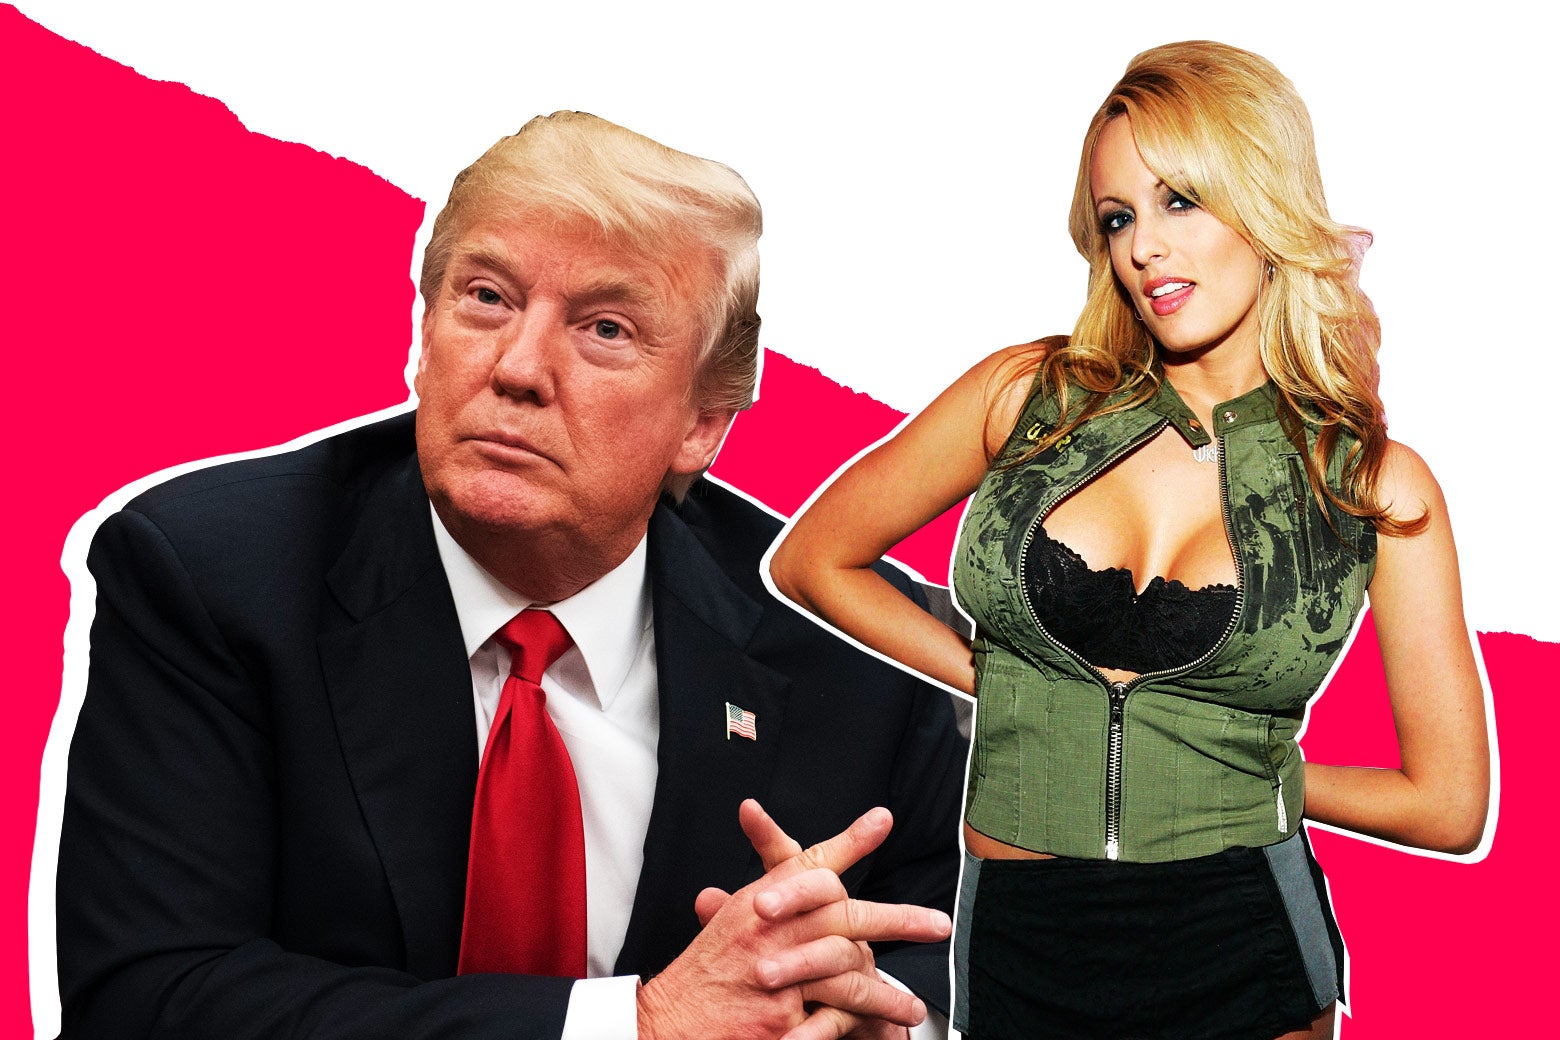 Did Donald Trump pay porn star Stormy Daniels to keep quiet about an affair? photo